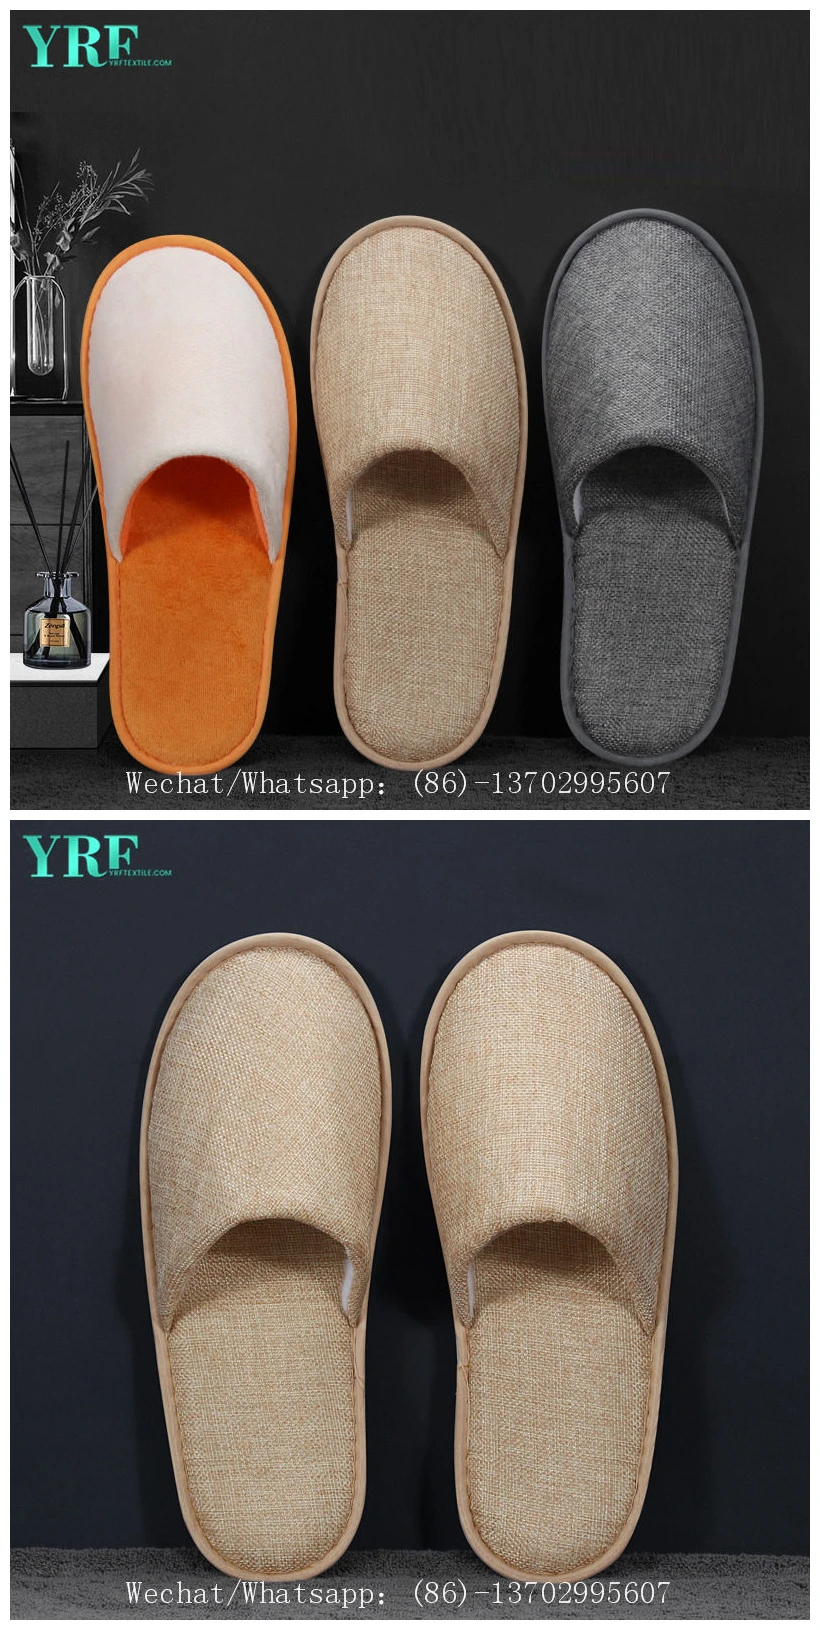 Yrf Personalized Hotel Products Women House Slippers Soft Sole Indoor Slippers